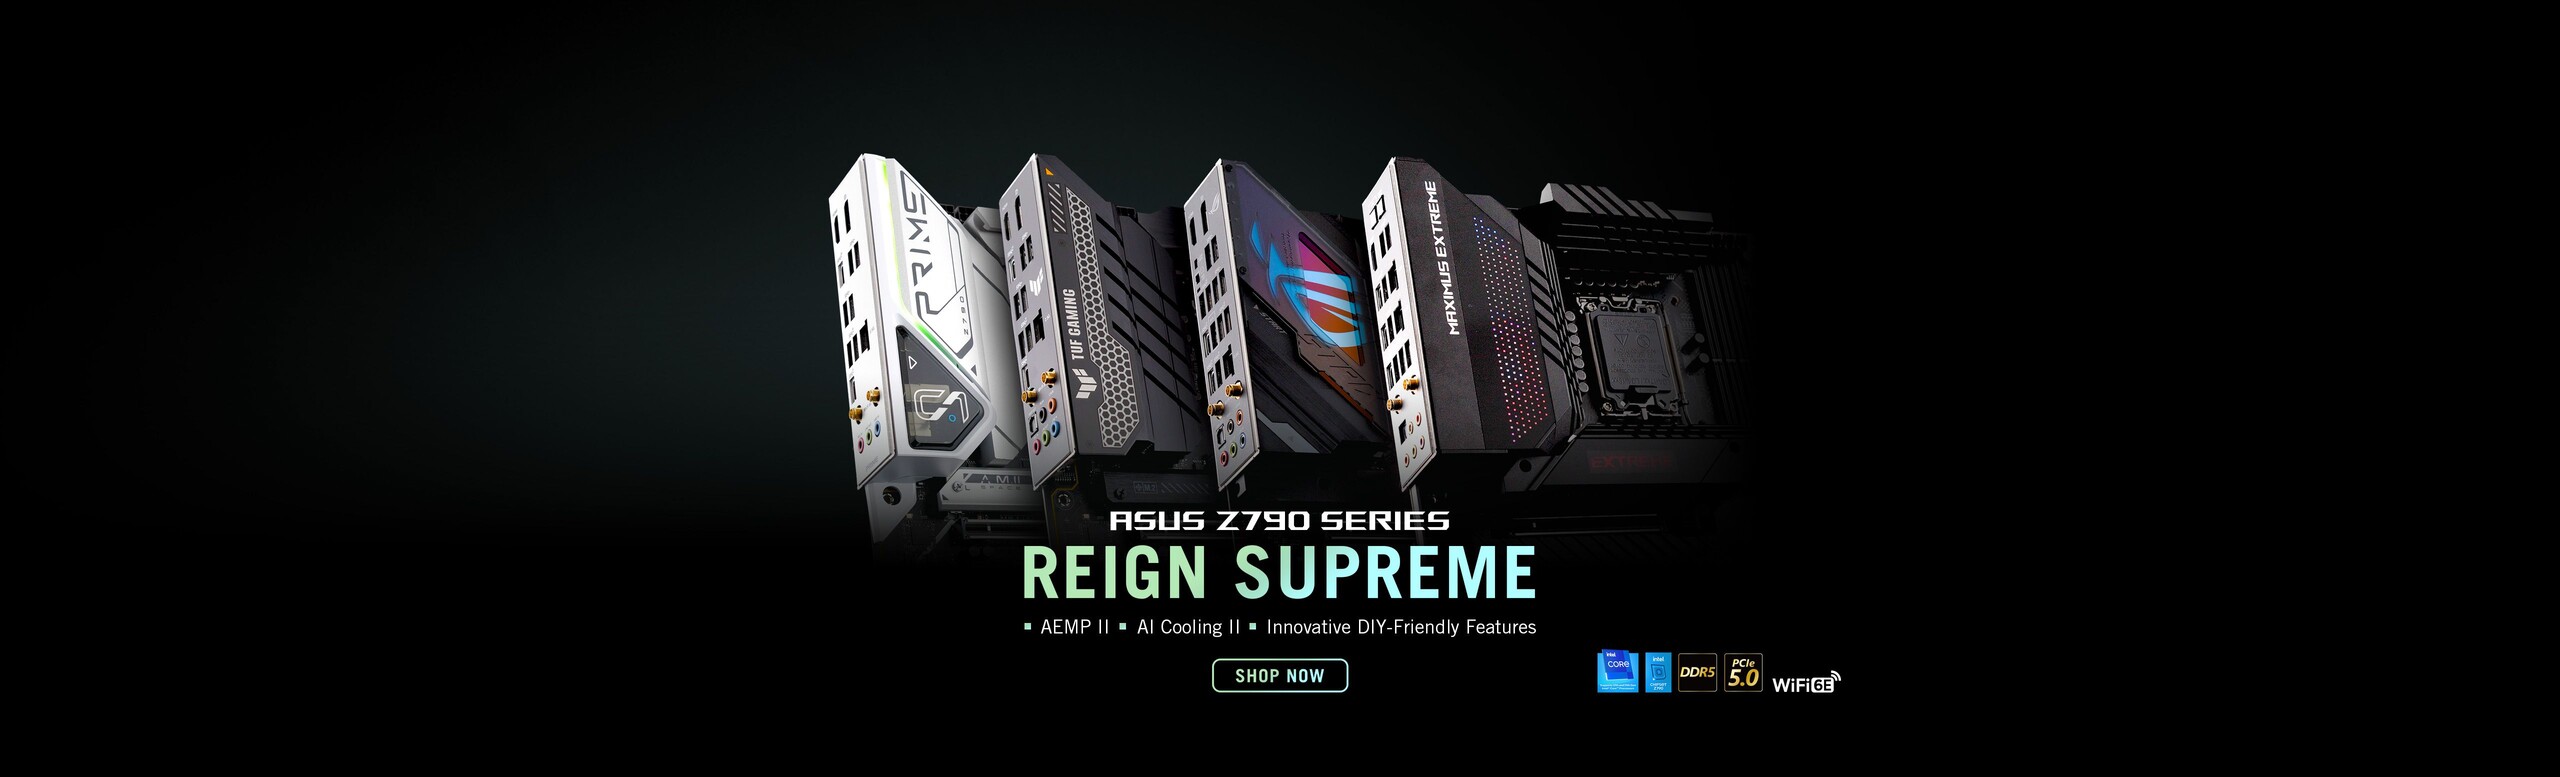 Four ASUS Z790 motherboards showcase supreme designs of their back I/O and covers with DDR5, PCIe 5.0 and Wi-Fi 6E logos.